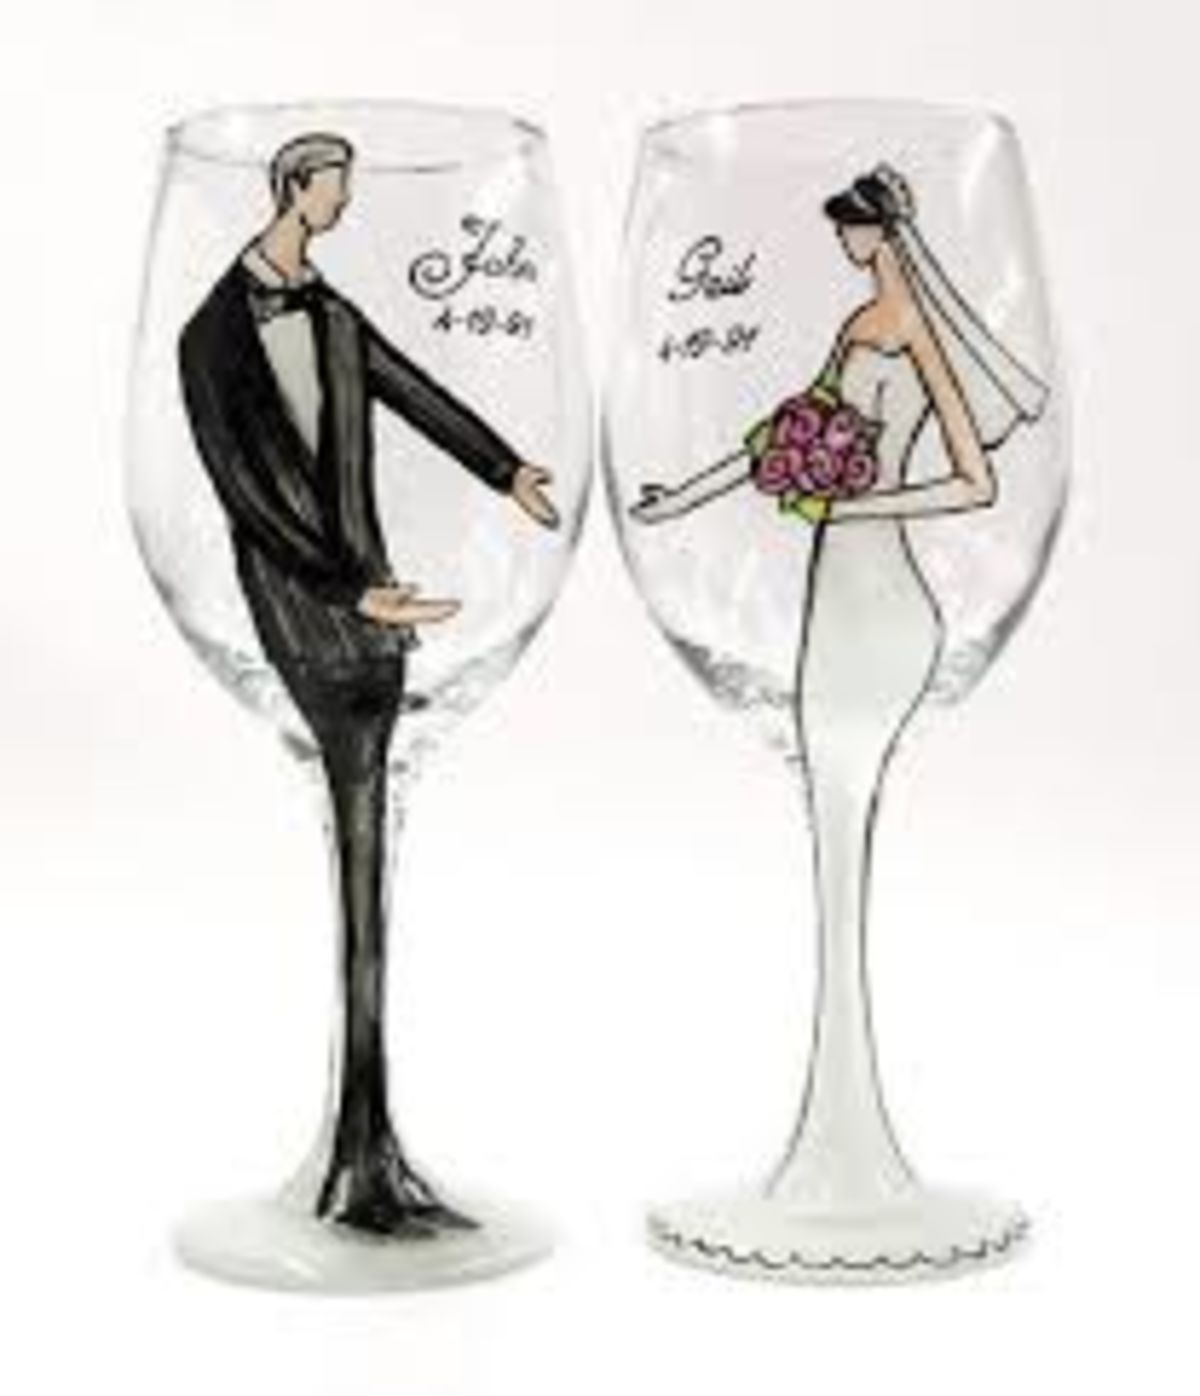 Personalized Glasses Wedding Art Unique Wine Glass Champagne Flute Bridal Wedding Gift Hand Painted Glasses Bachelorette Party Wine Glasses